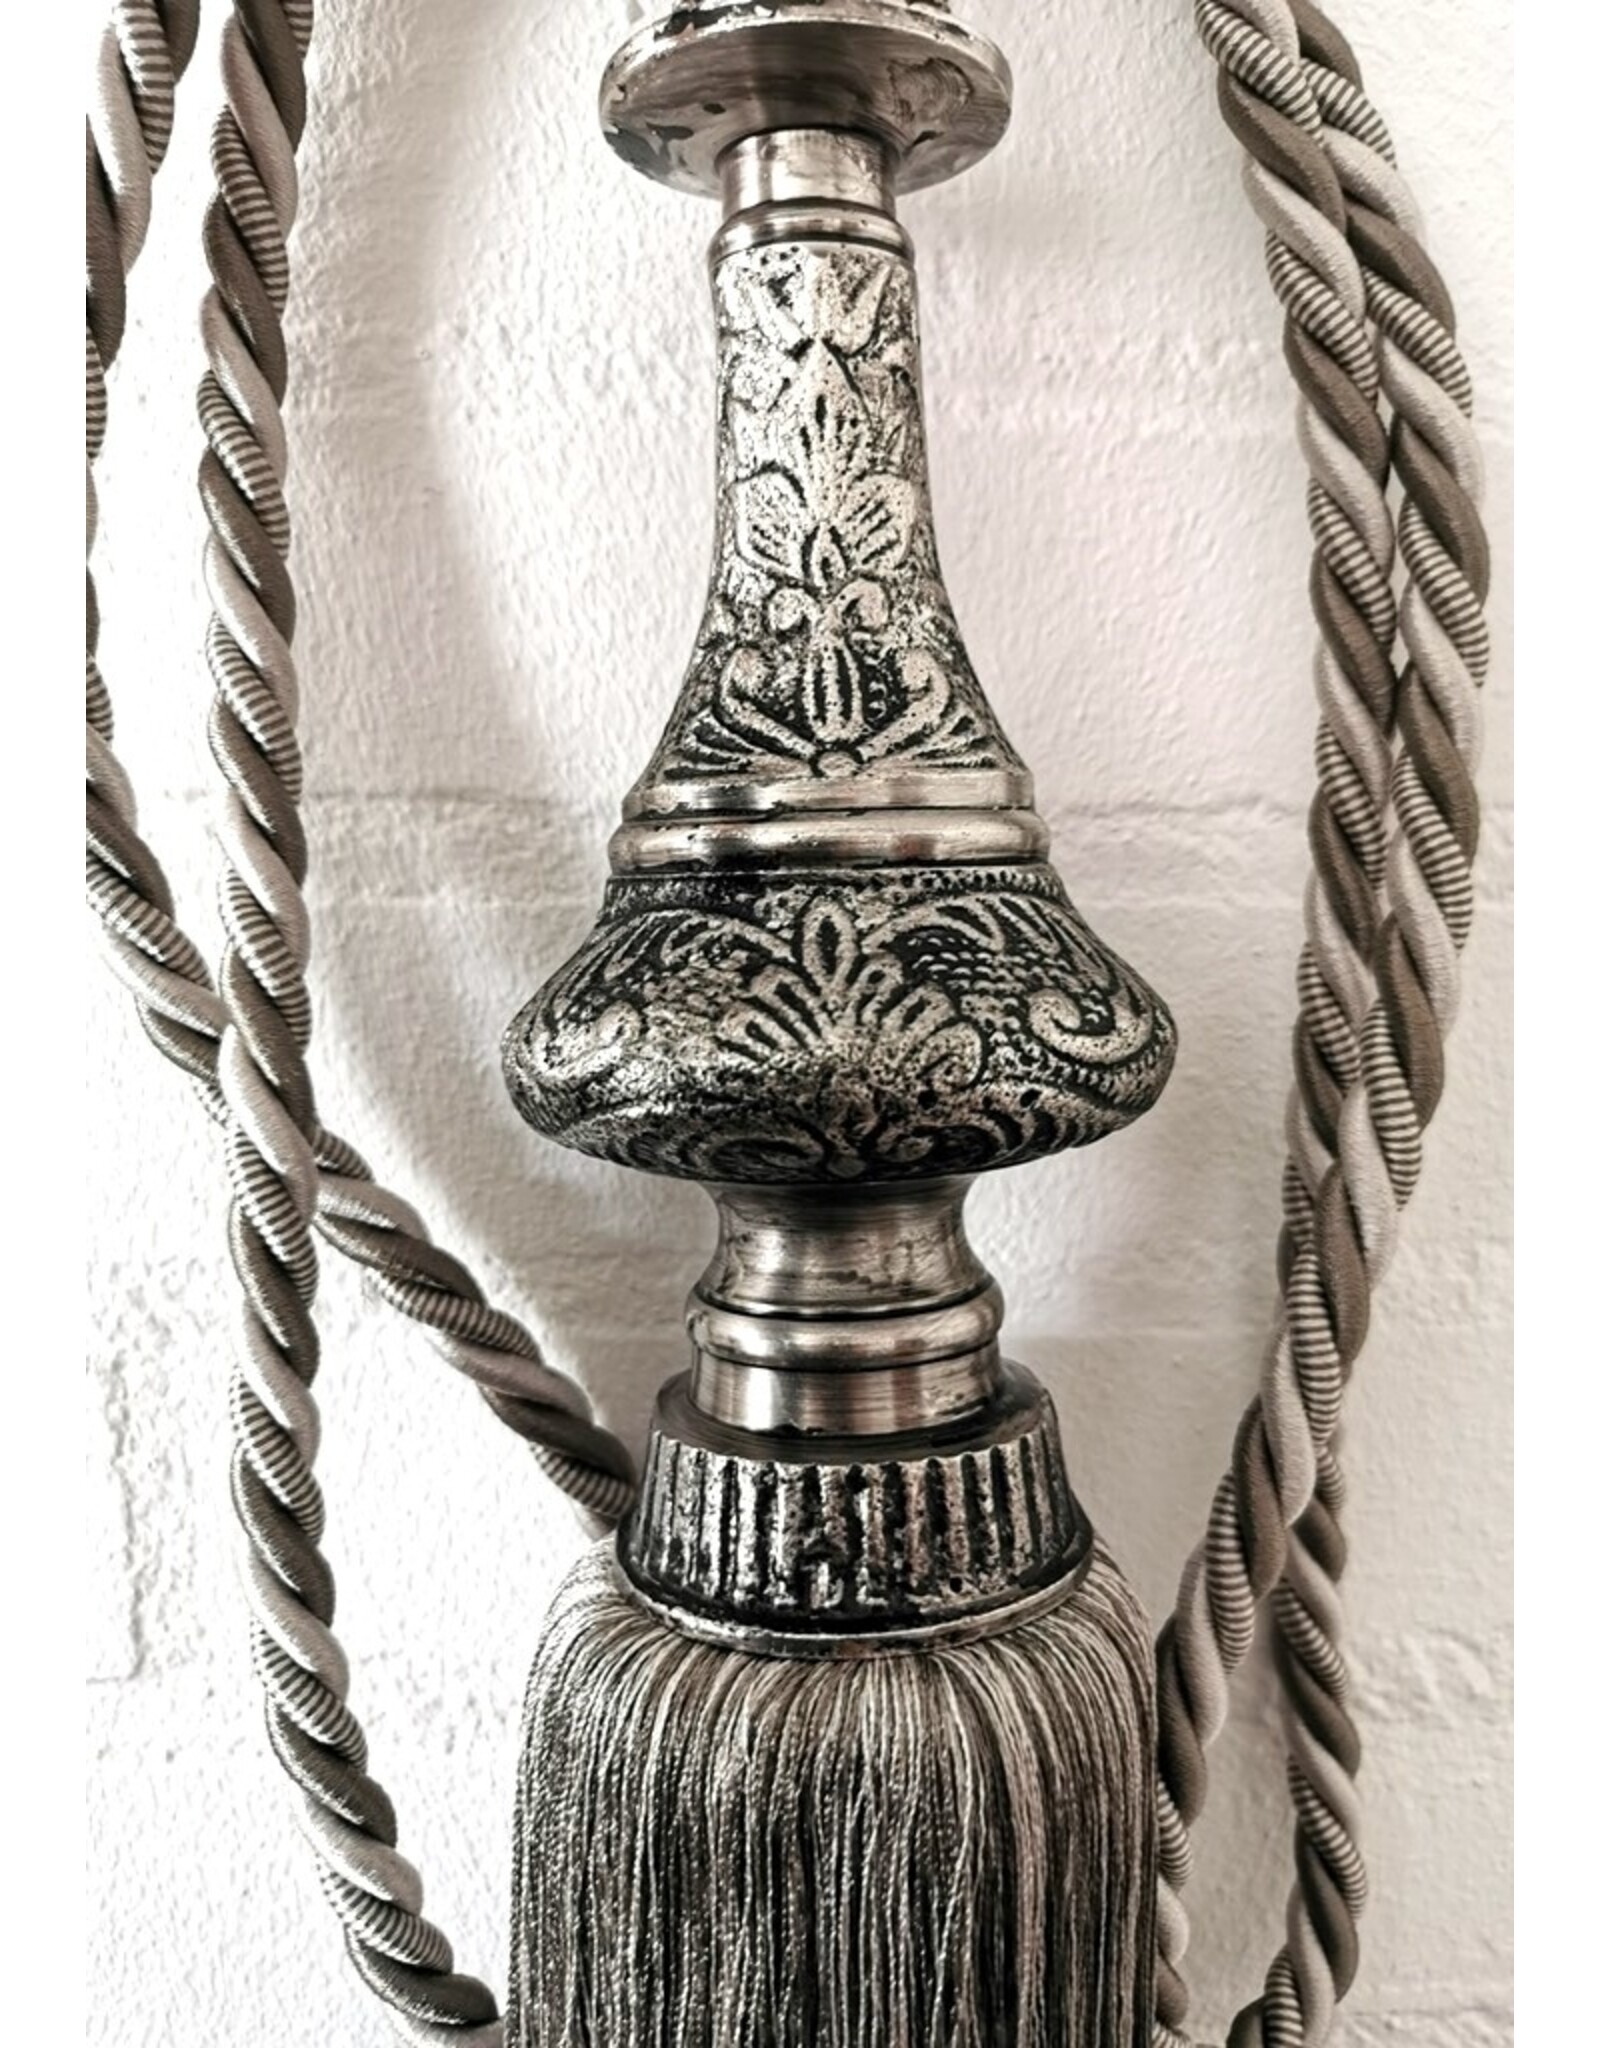 Dutch Style Miscellaneous - Tassel Baroque Style Silver Gray (Large)